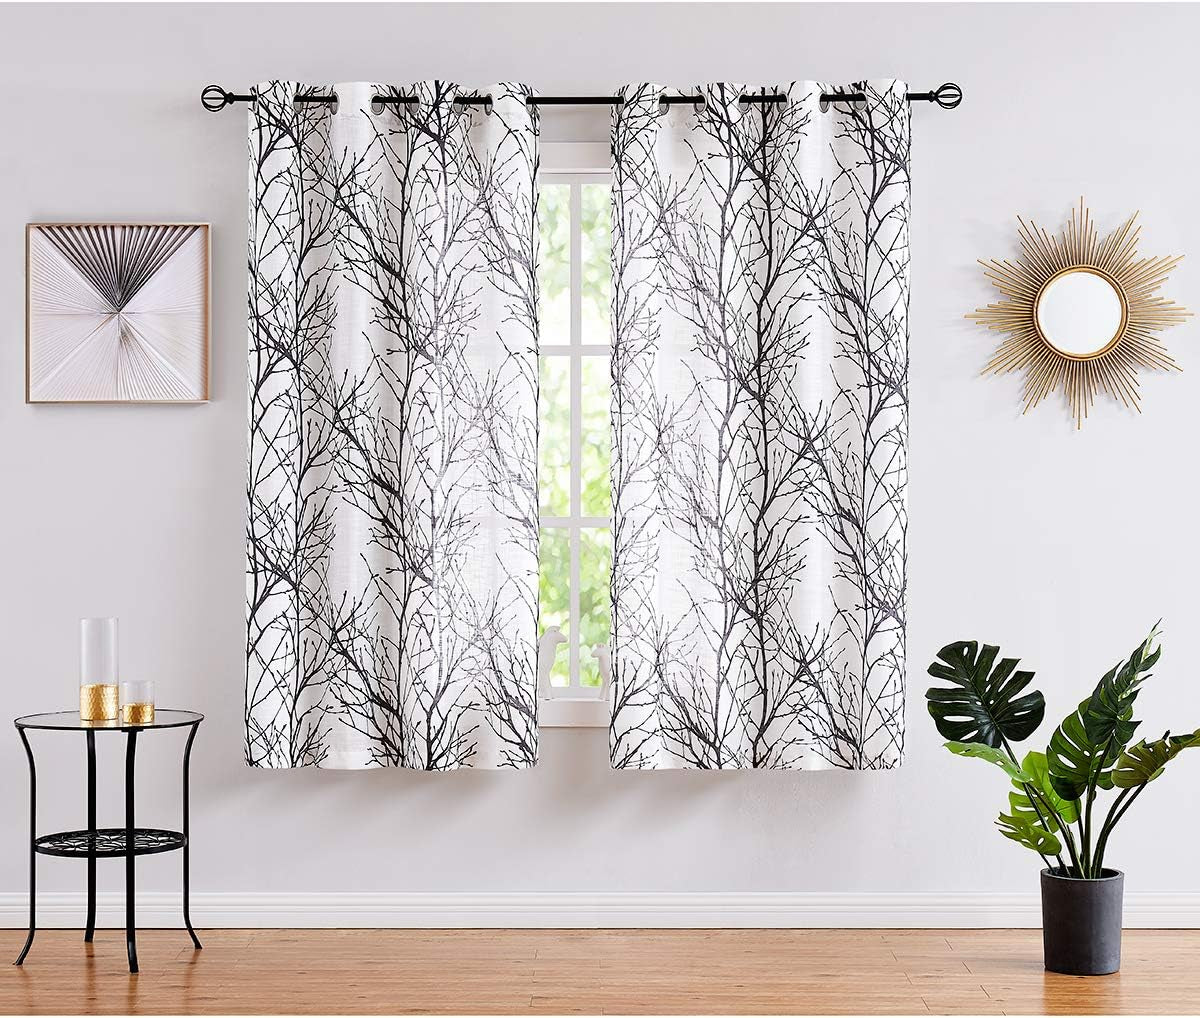 FMFUNCTEX Blue White Curtains for Kitchen Living Room 72“ Grey Tree Branches Print Curtain Set for Small Windows Linen Textured Semi-Sheer Drapes for Bedroom Grommet Top, 2 Panels  Fmfunctex Black 50" X 63" |2Pcs 